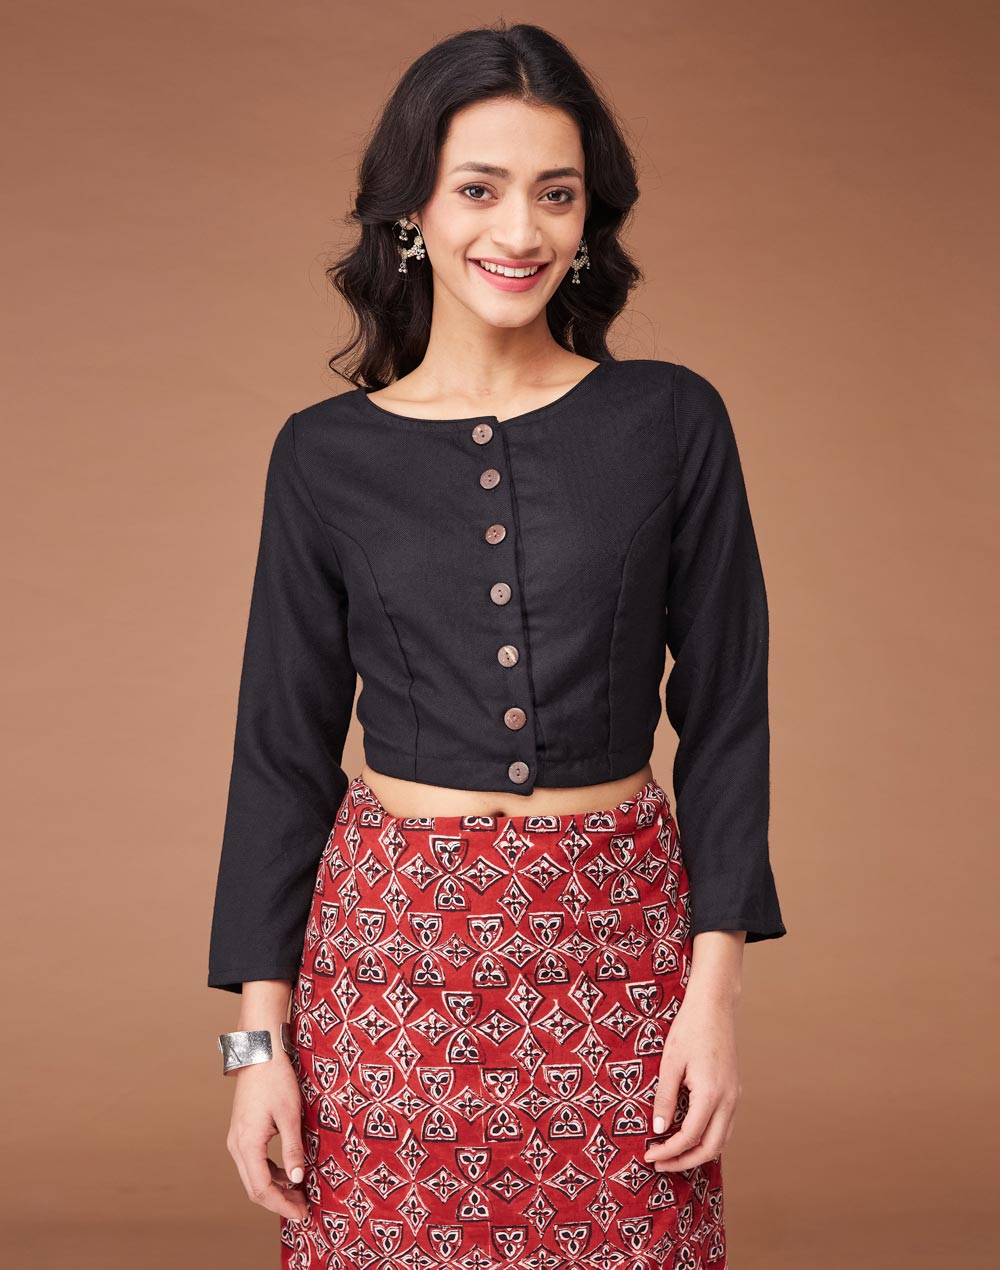 Buy Blouses for Women, Readymade Blouse Online at Fabindia